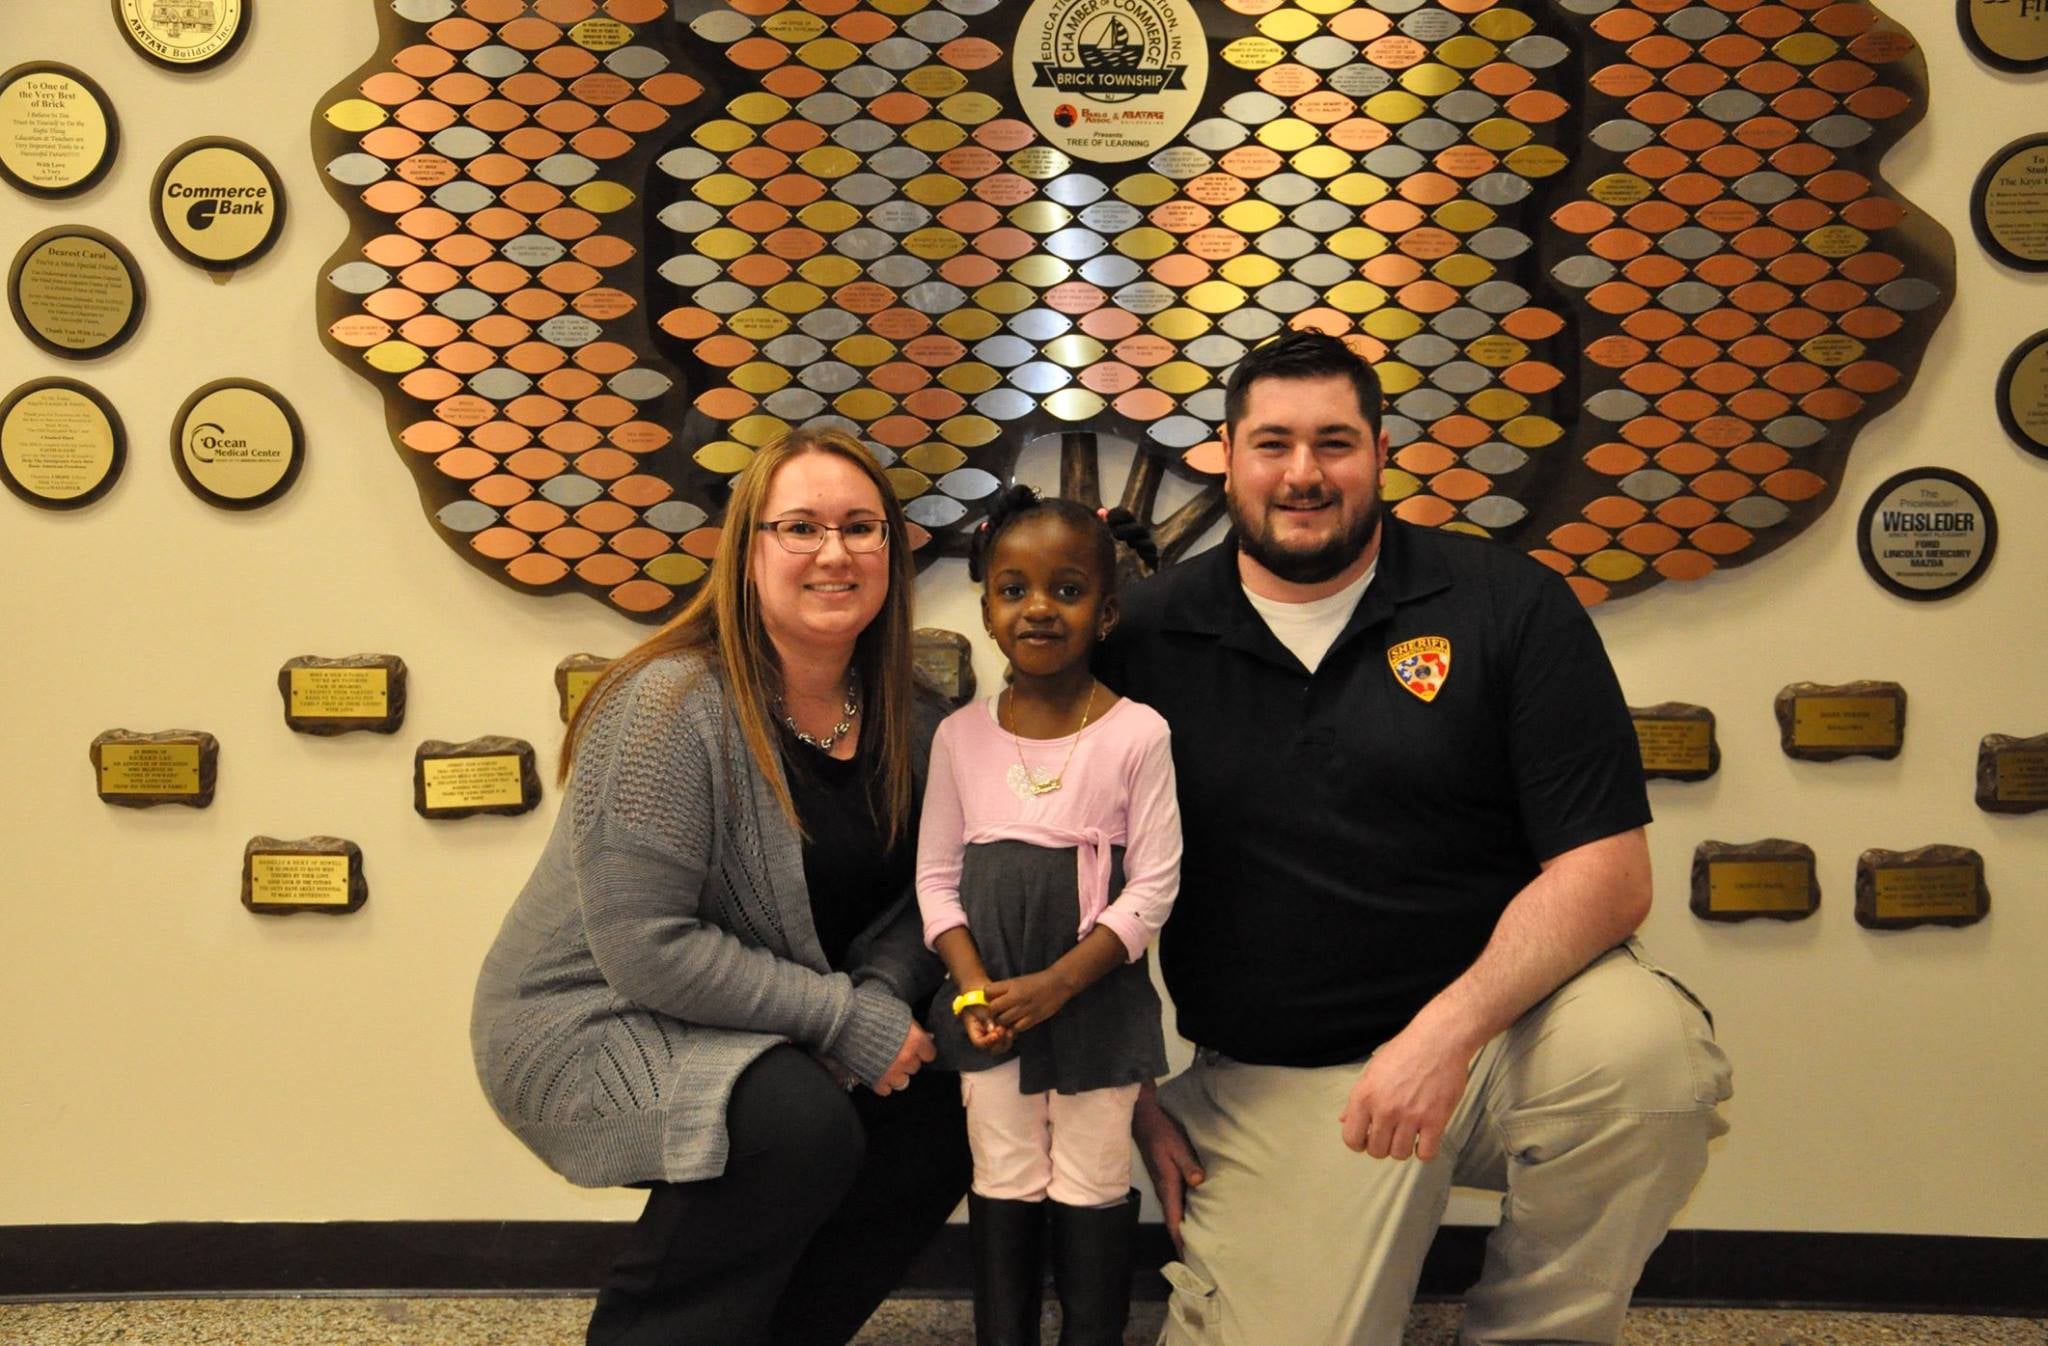  Kimberly Greenspan, Brick Township 911 Operator, and Public Safety Telecommunicator  Richard Incremona with the 3-year-old Brick Township girl who dialed 9-1-1 when she couldn't wake her mother. (Image courtesy of the Brick Township Police Department) 